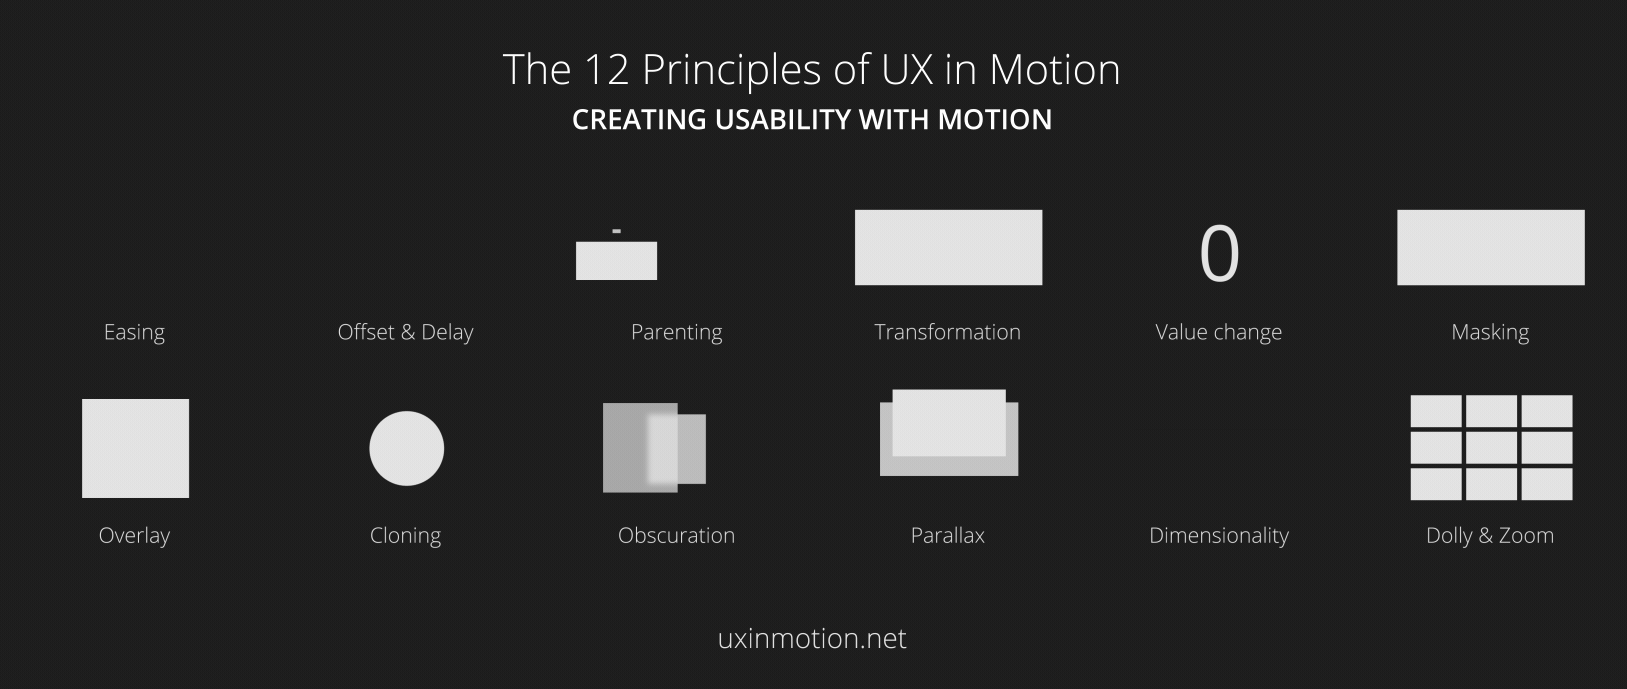 The 12 Principles of UX in Motion